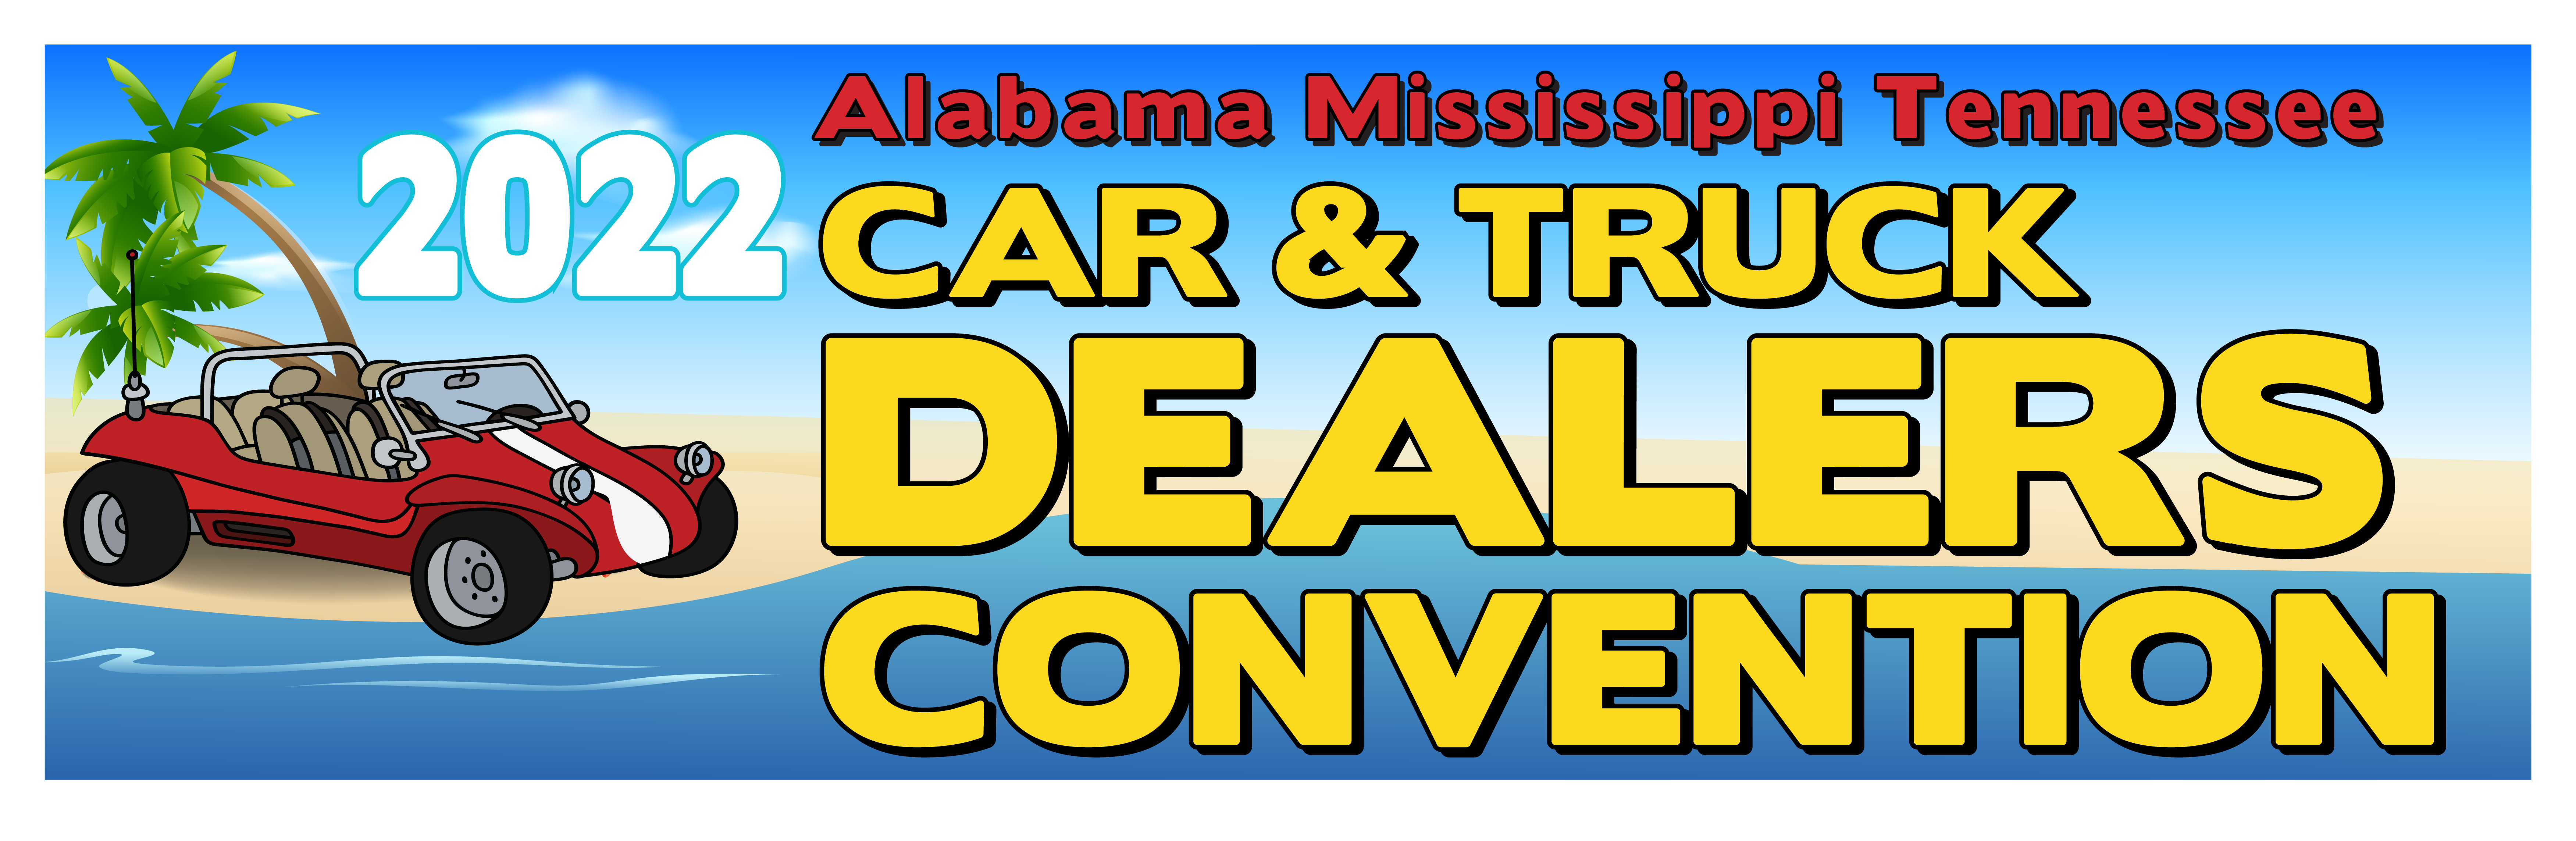 Car & Truck Dealers Convention 2022, June 20th - 23rd, 2022